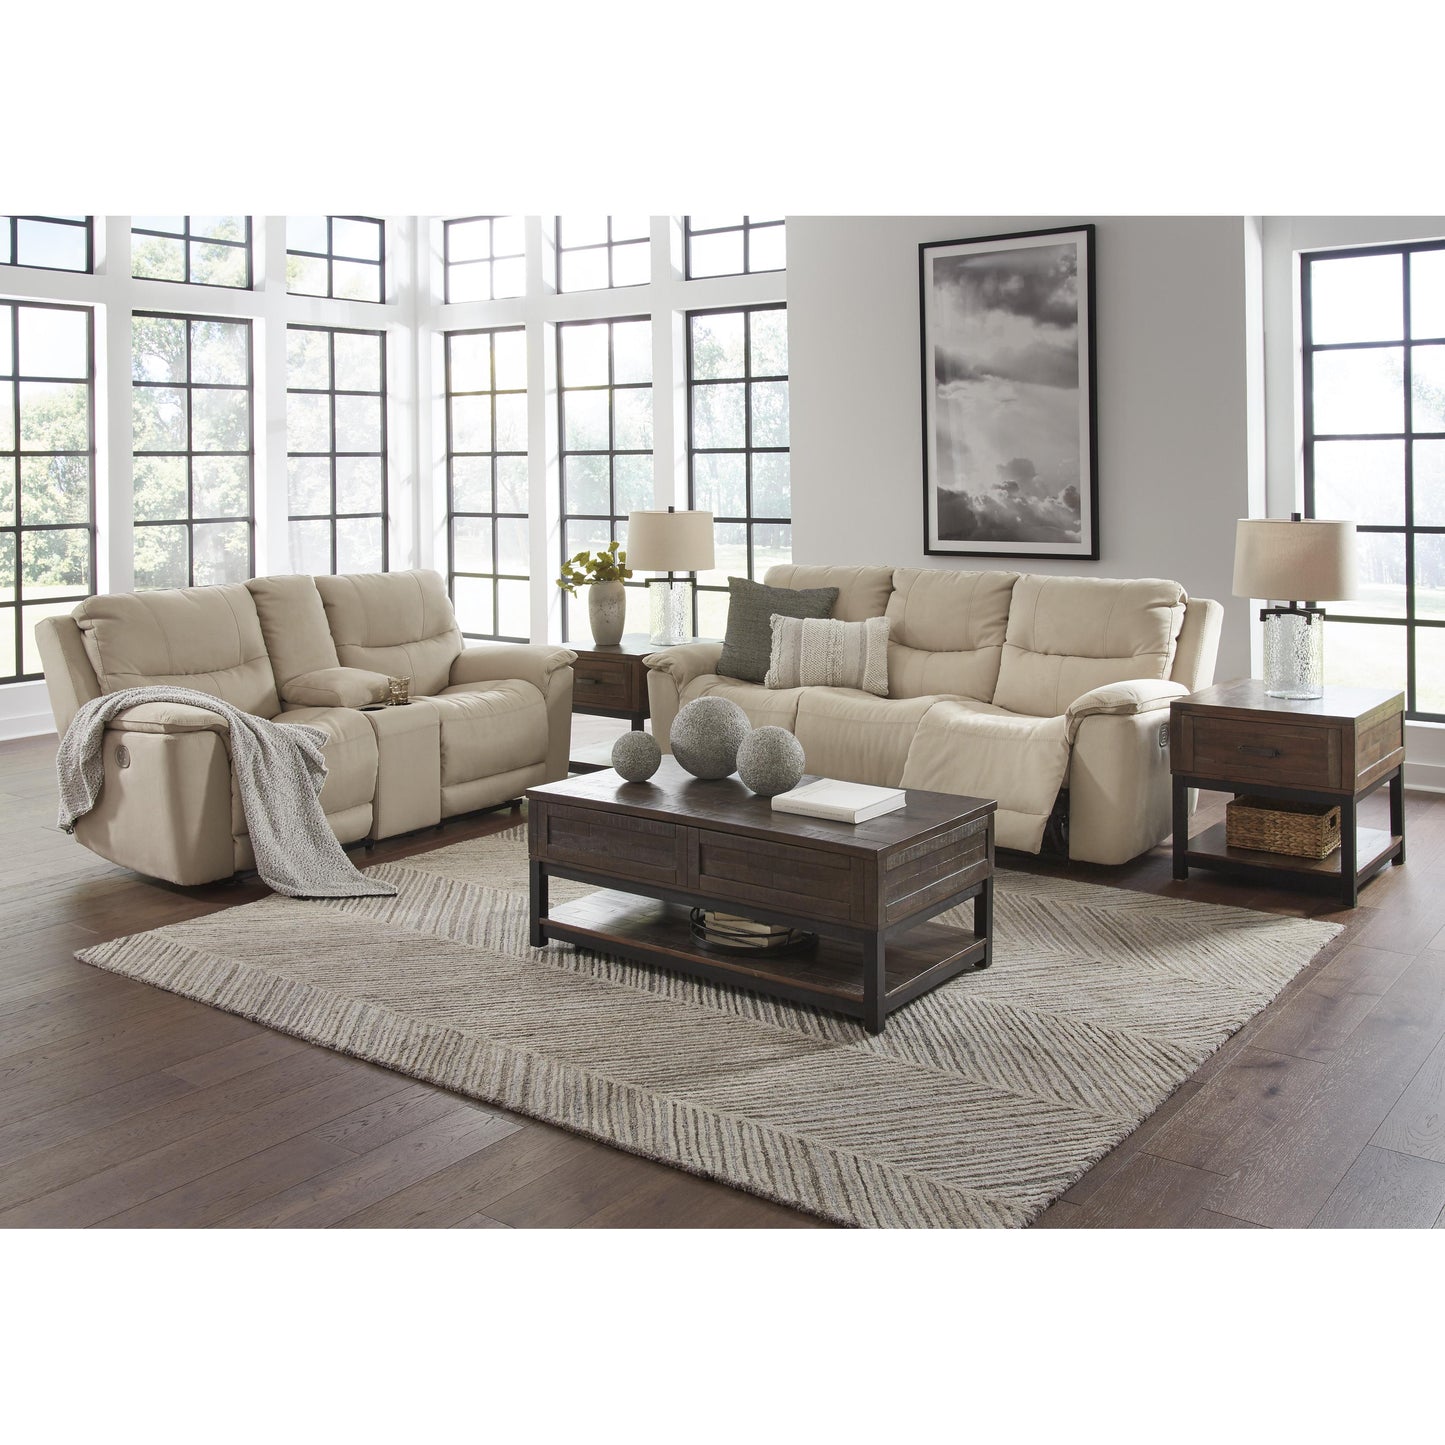 Signature Design by Ashley Next-Gen Gaucho Power Reclining Leather Look Loveseat 6080718 IMAGE 11